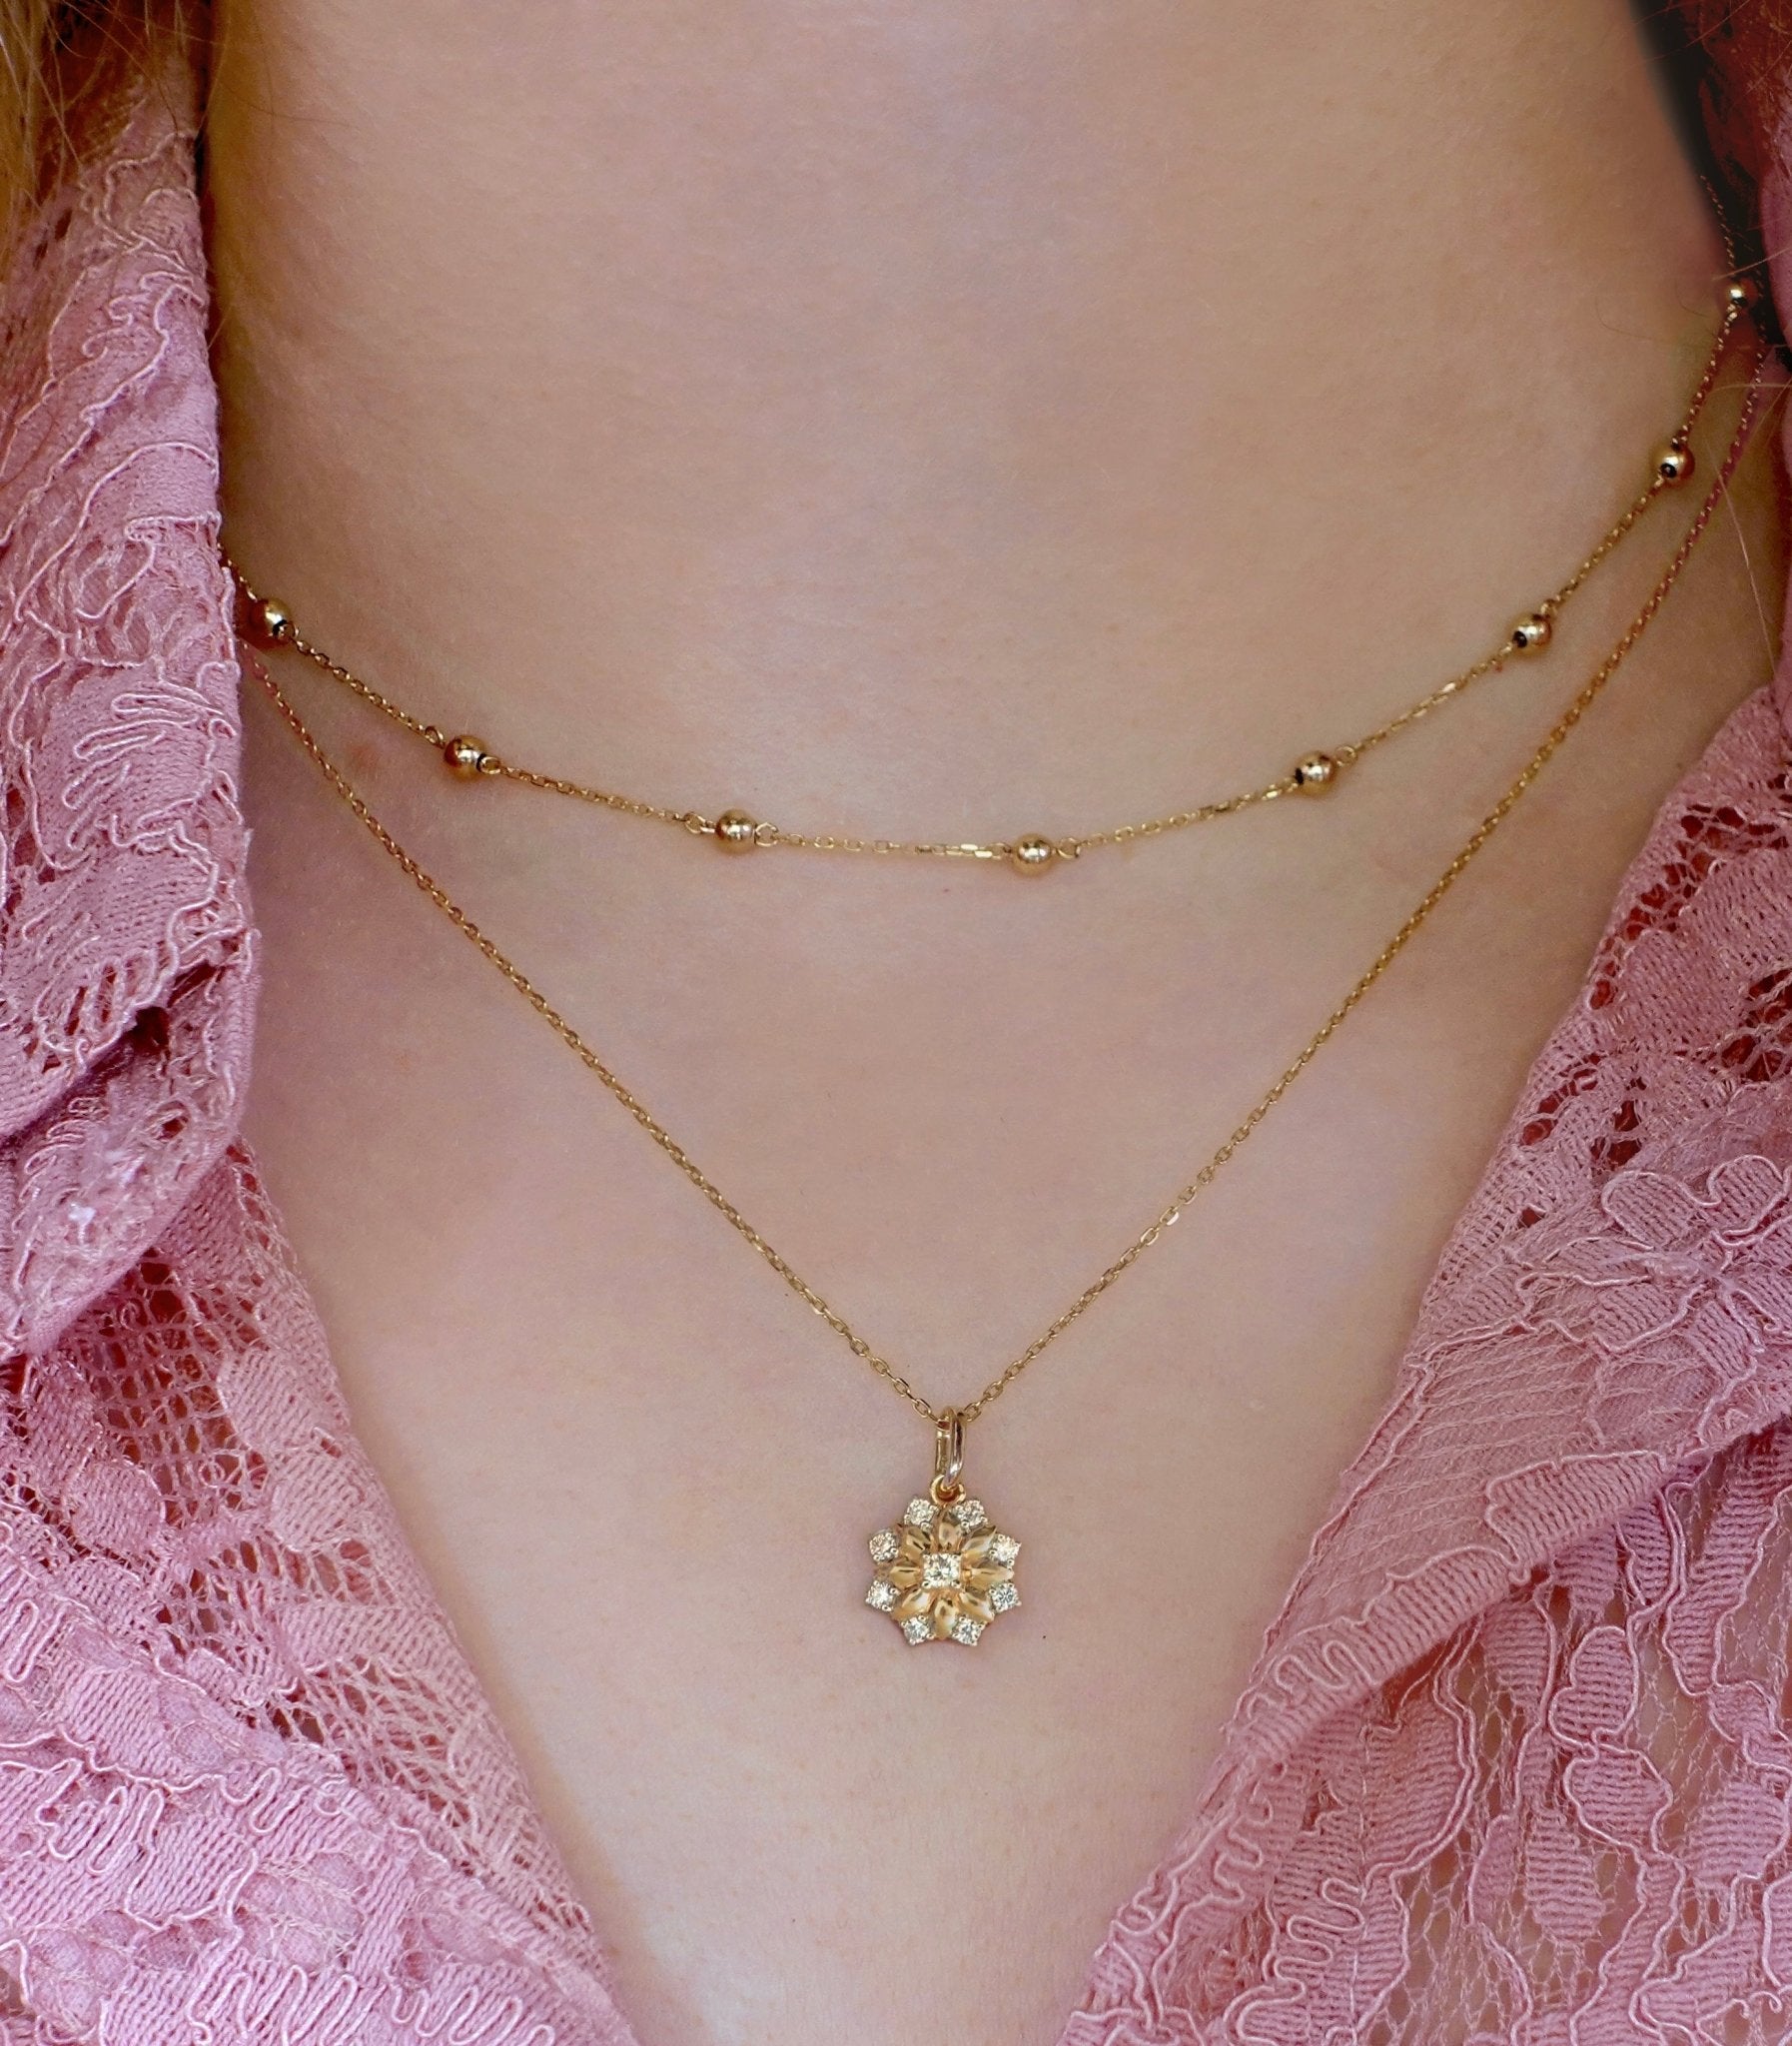 Cleo Necklace in Diamond - 18k Gold - Lynor